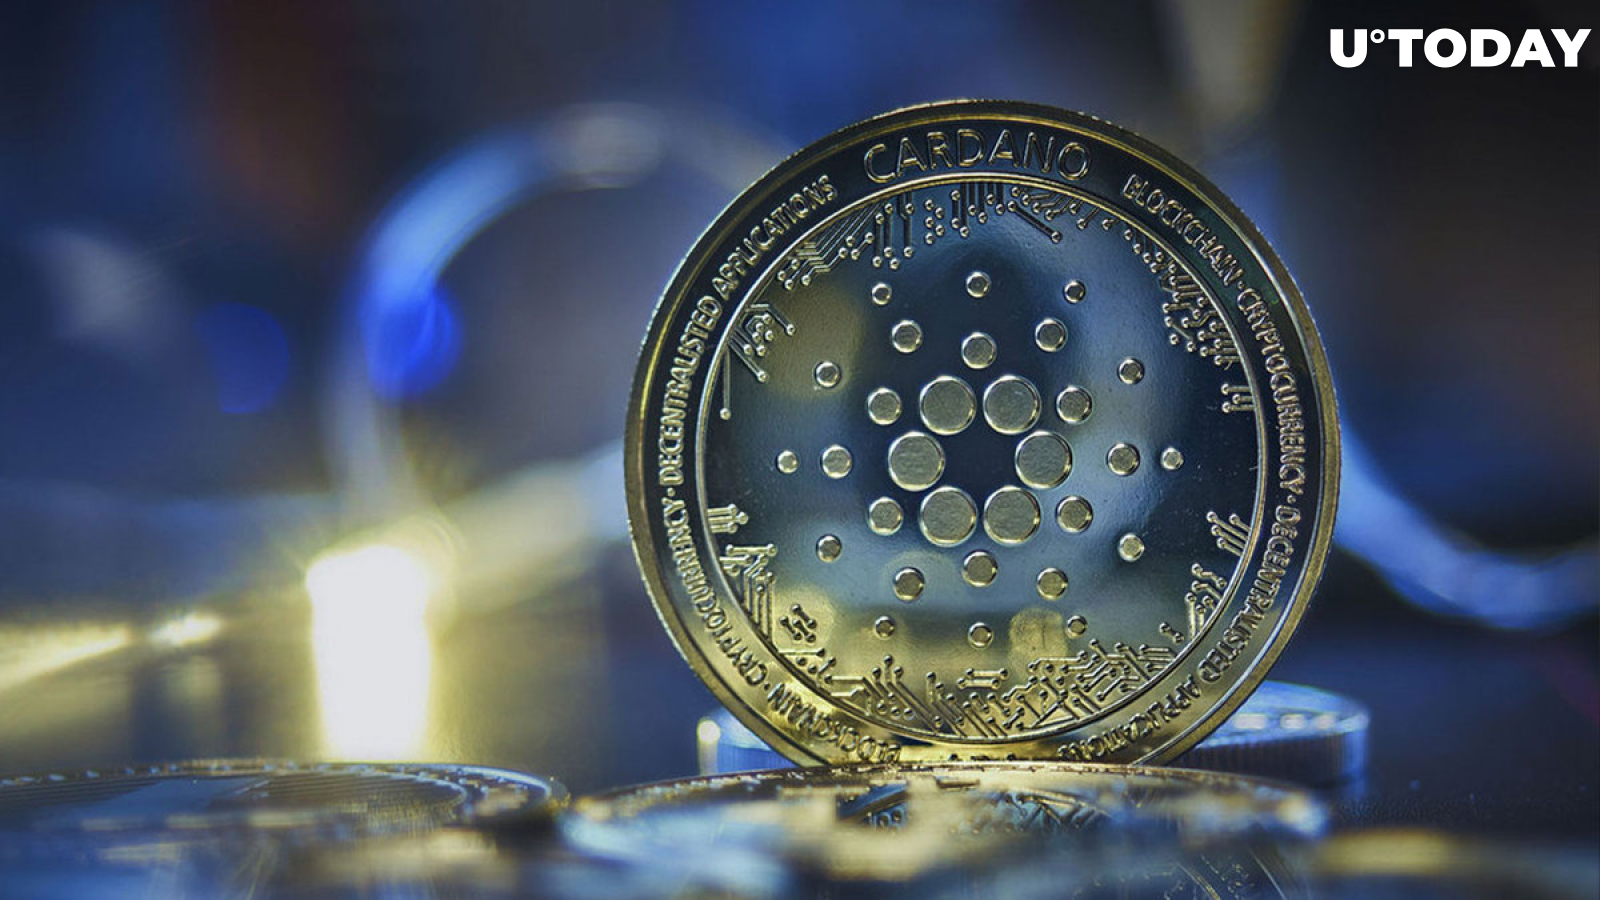 Cardano (ADA) Price Growth Lags, Here's What Can Drive Short-Term Growth